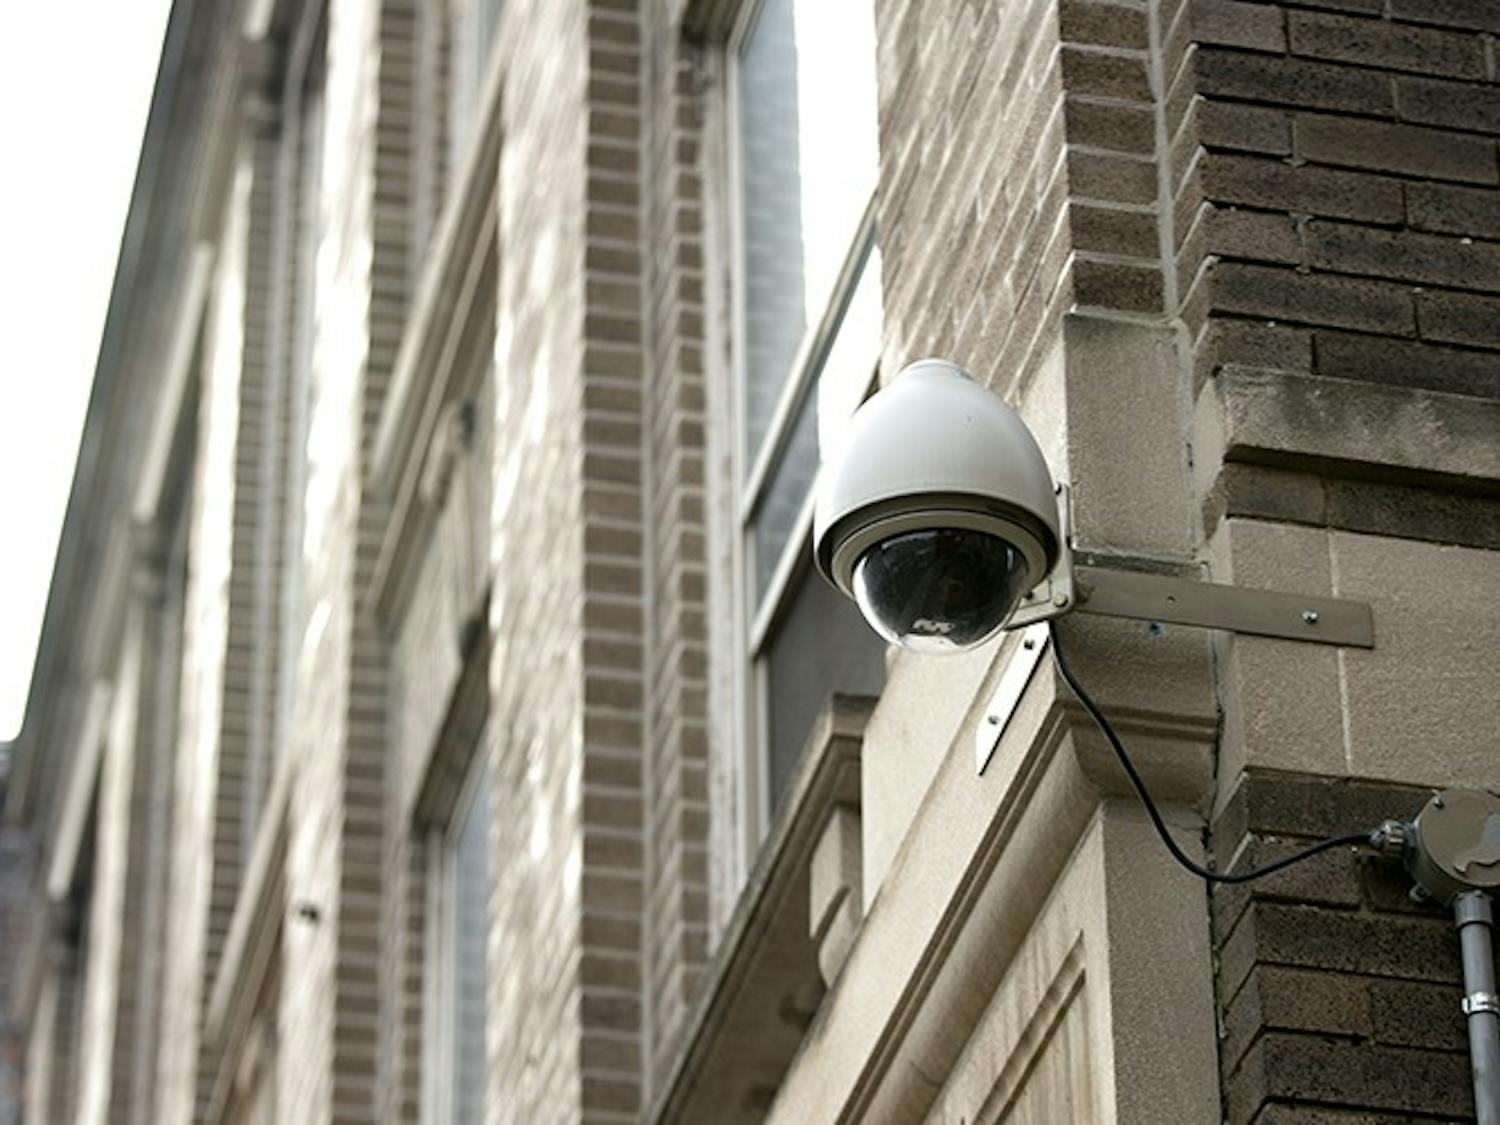 Uptown cameras not useful, officials say  